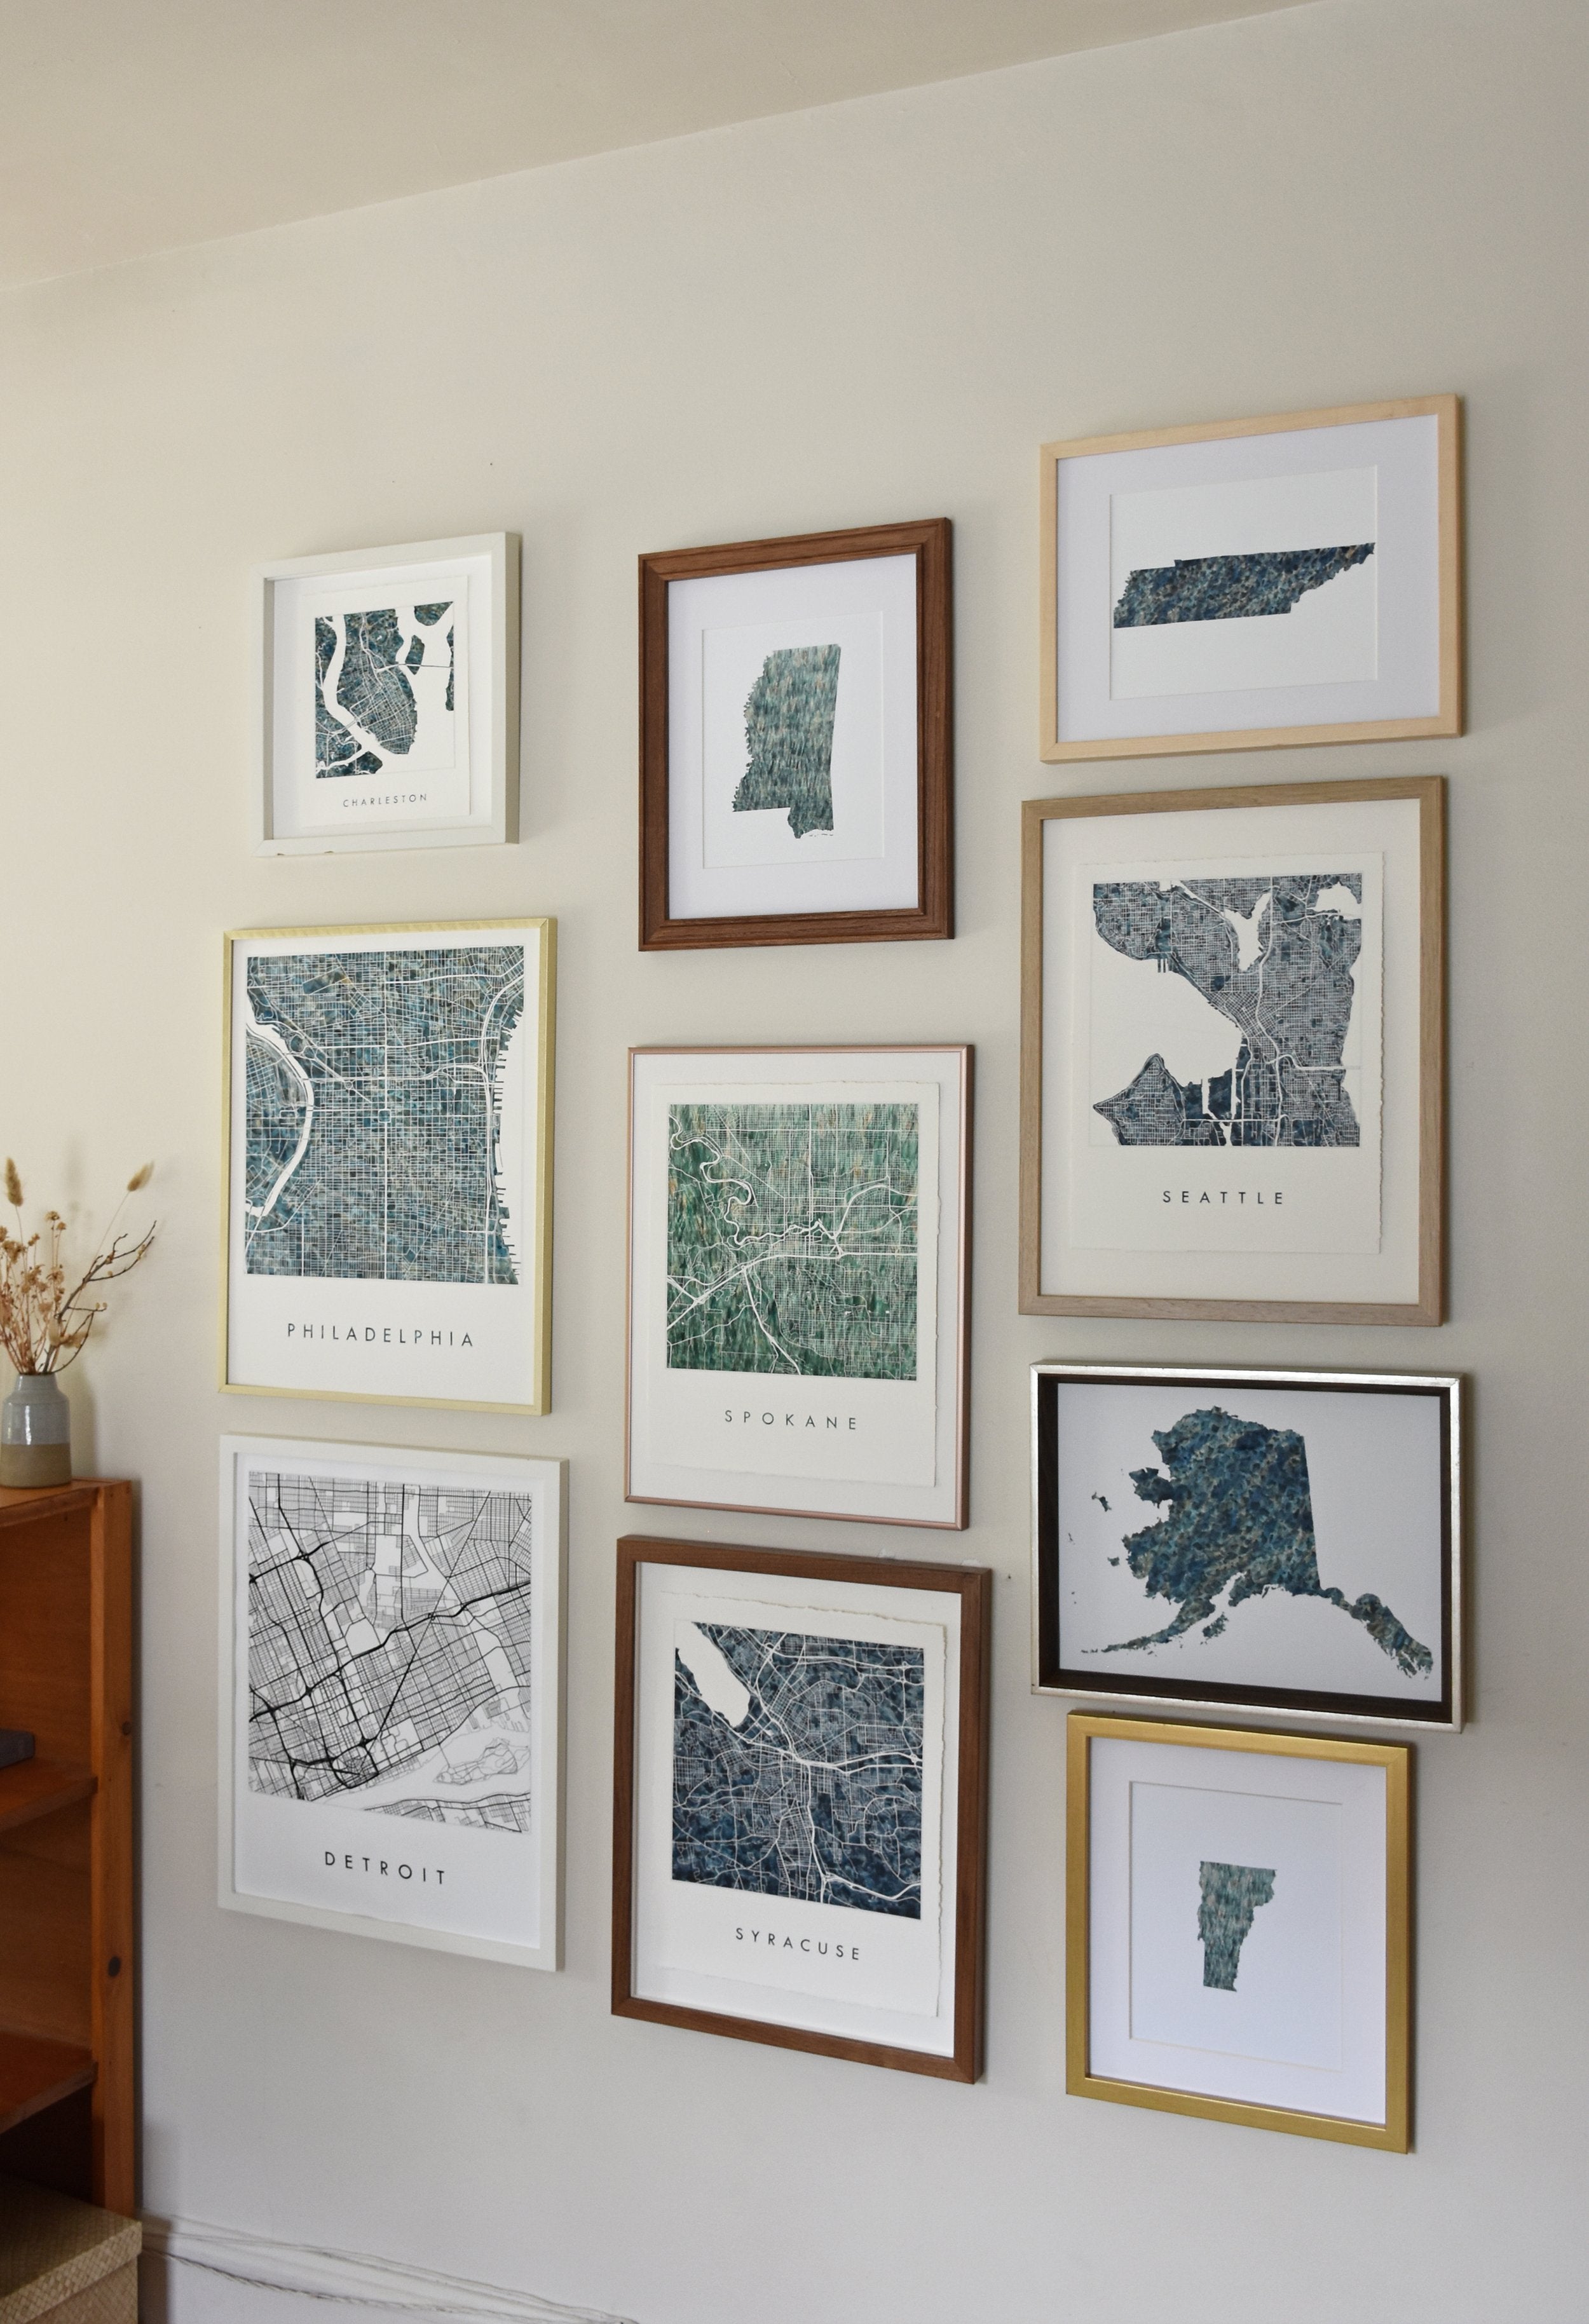 VERMONT State Map: PRINT